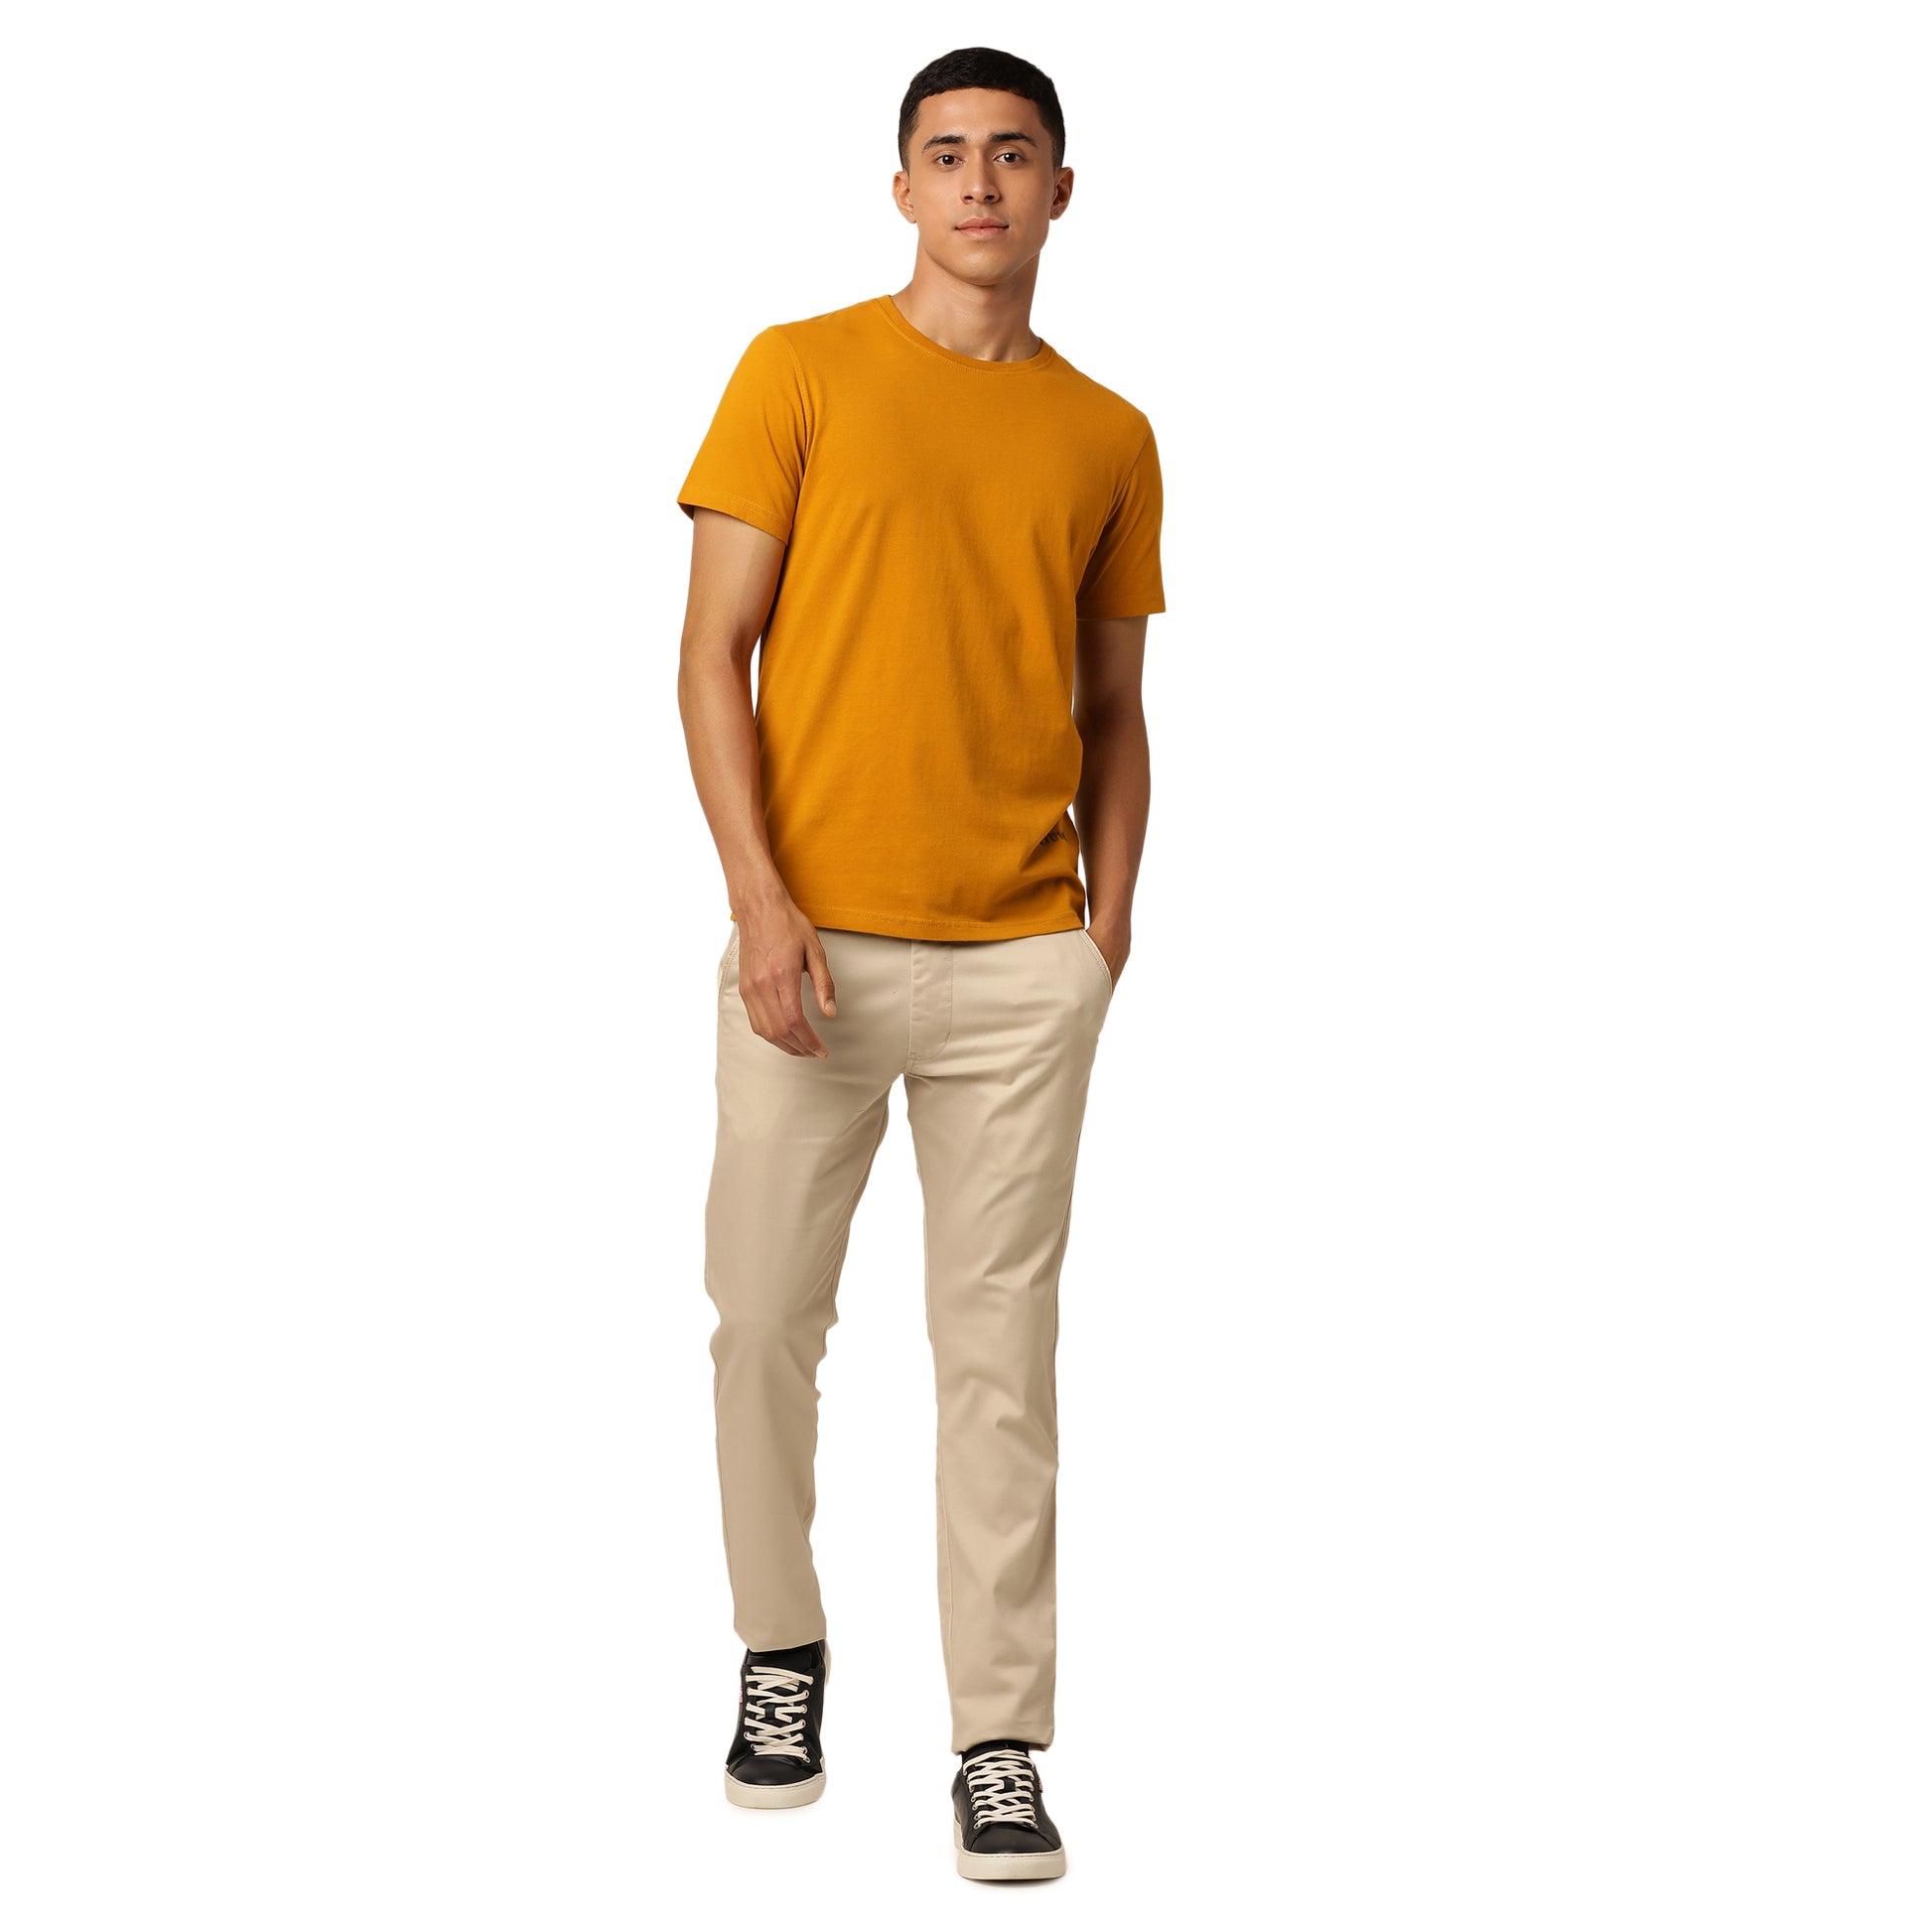 A person stands against a white background, wearing a mustard yellow Northmist Amity Combo Pack: Organic Crew Neck T-shirt, beige pants, and stylish black high-top sneakers. The individual has one hand in their pocket and looks directly at the camera with a neutral expression.